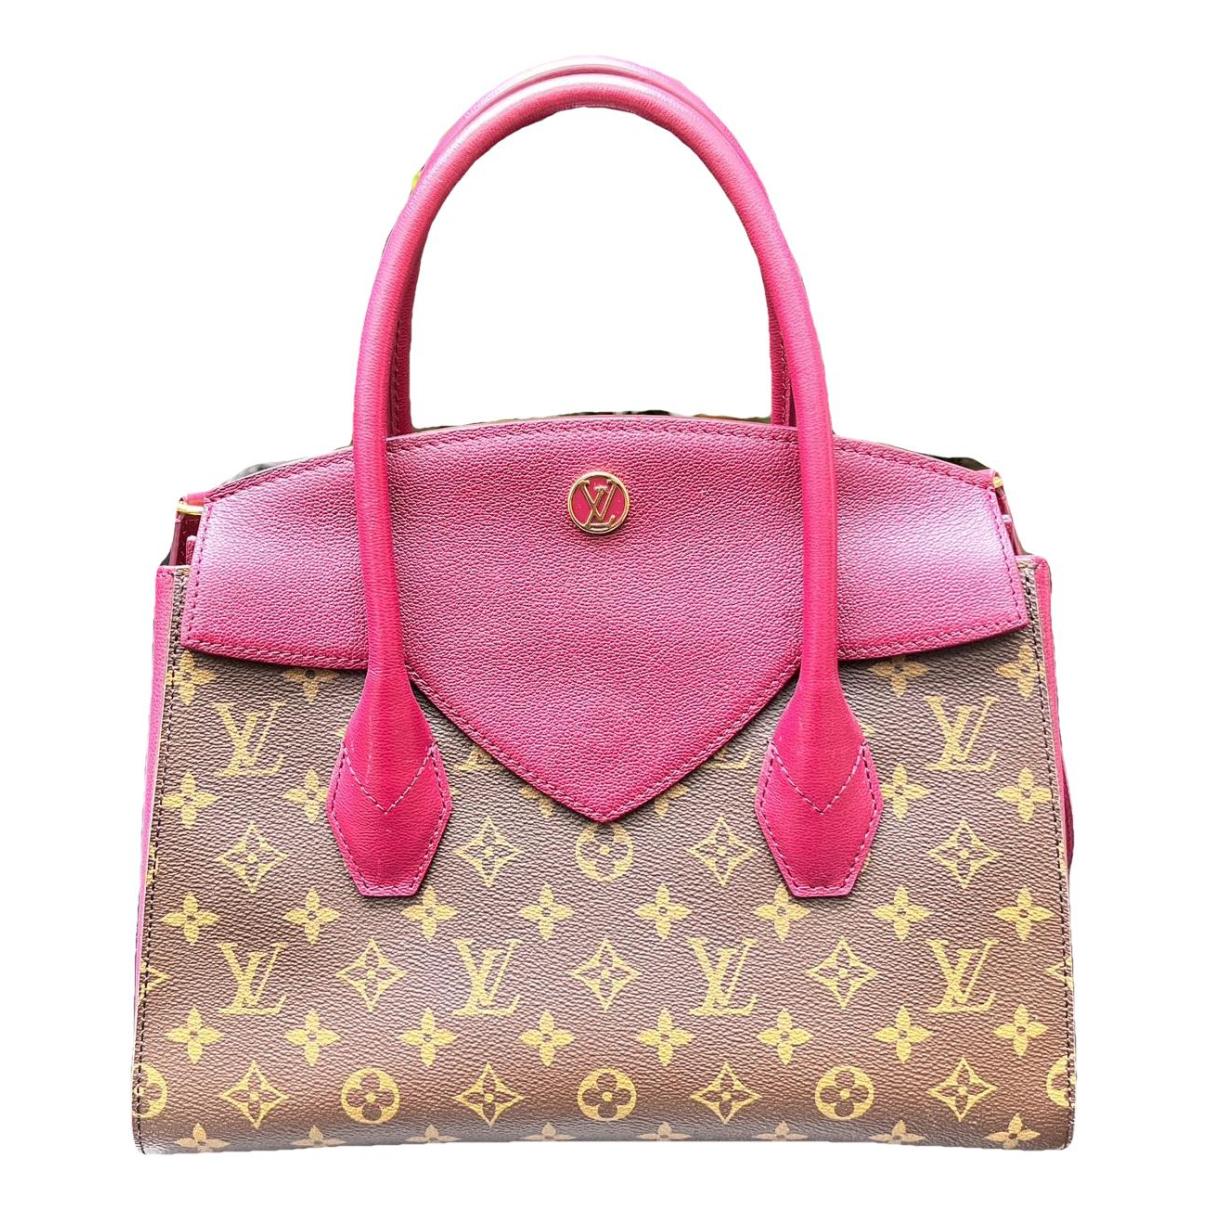 flower tote louis vuitton price from Taobao - YOYbuy